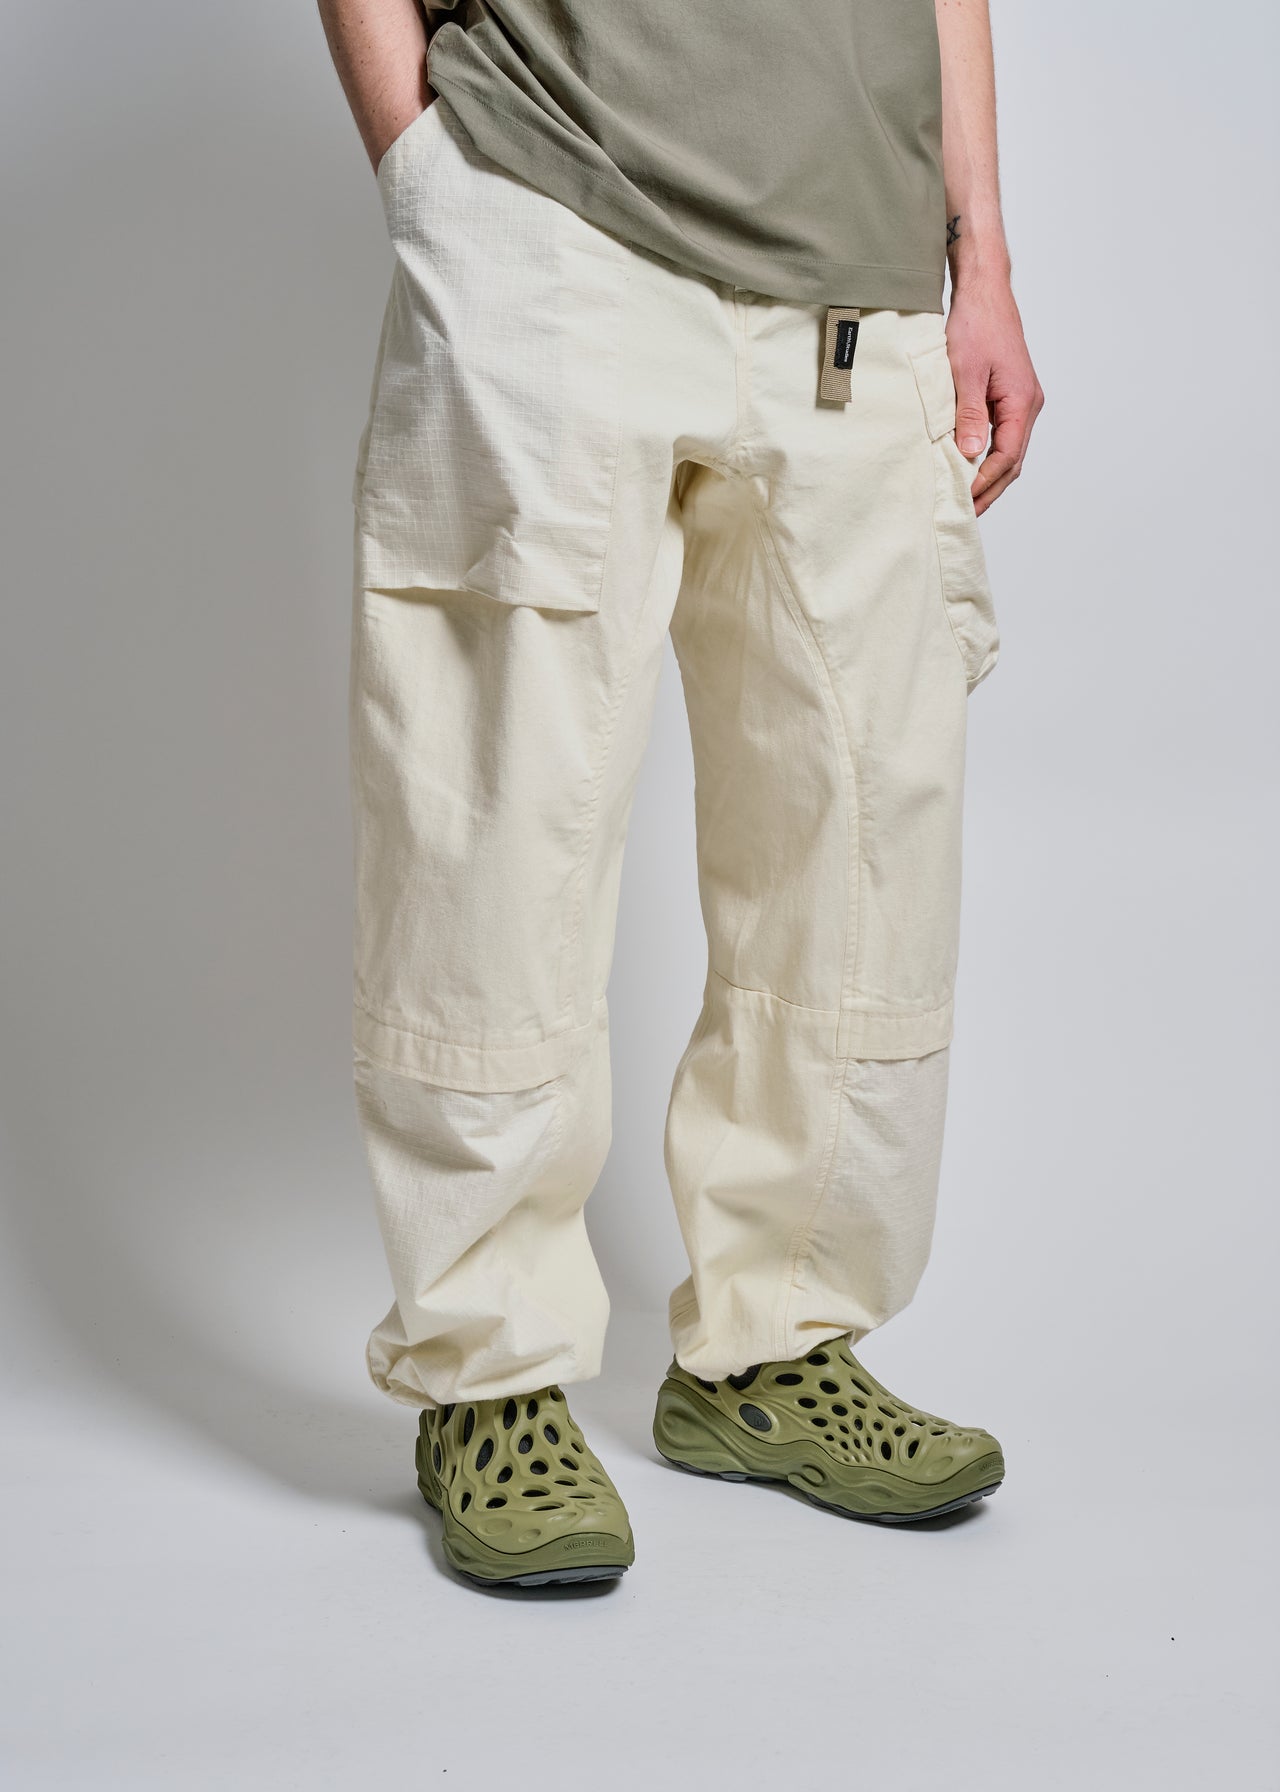 MP-108 Utility Pant in Earth White